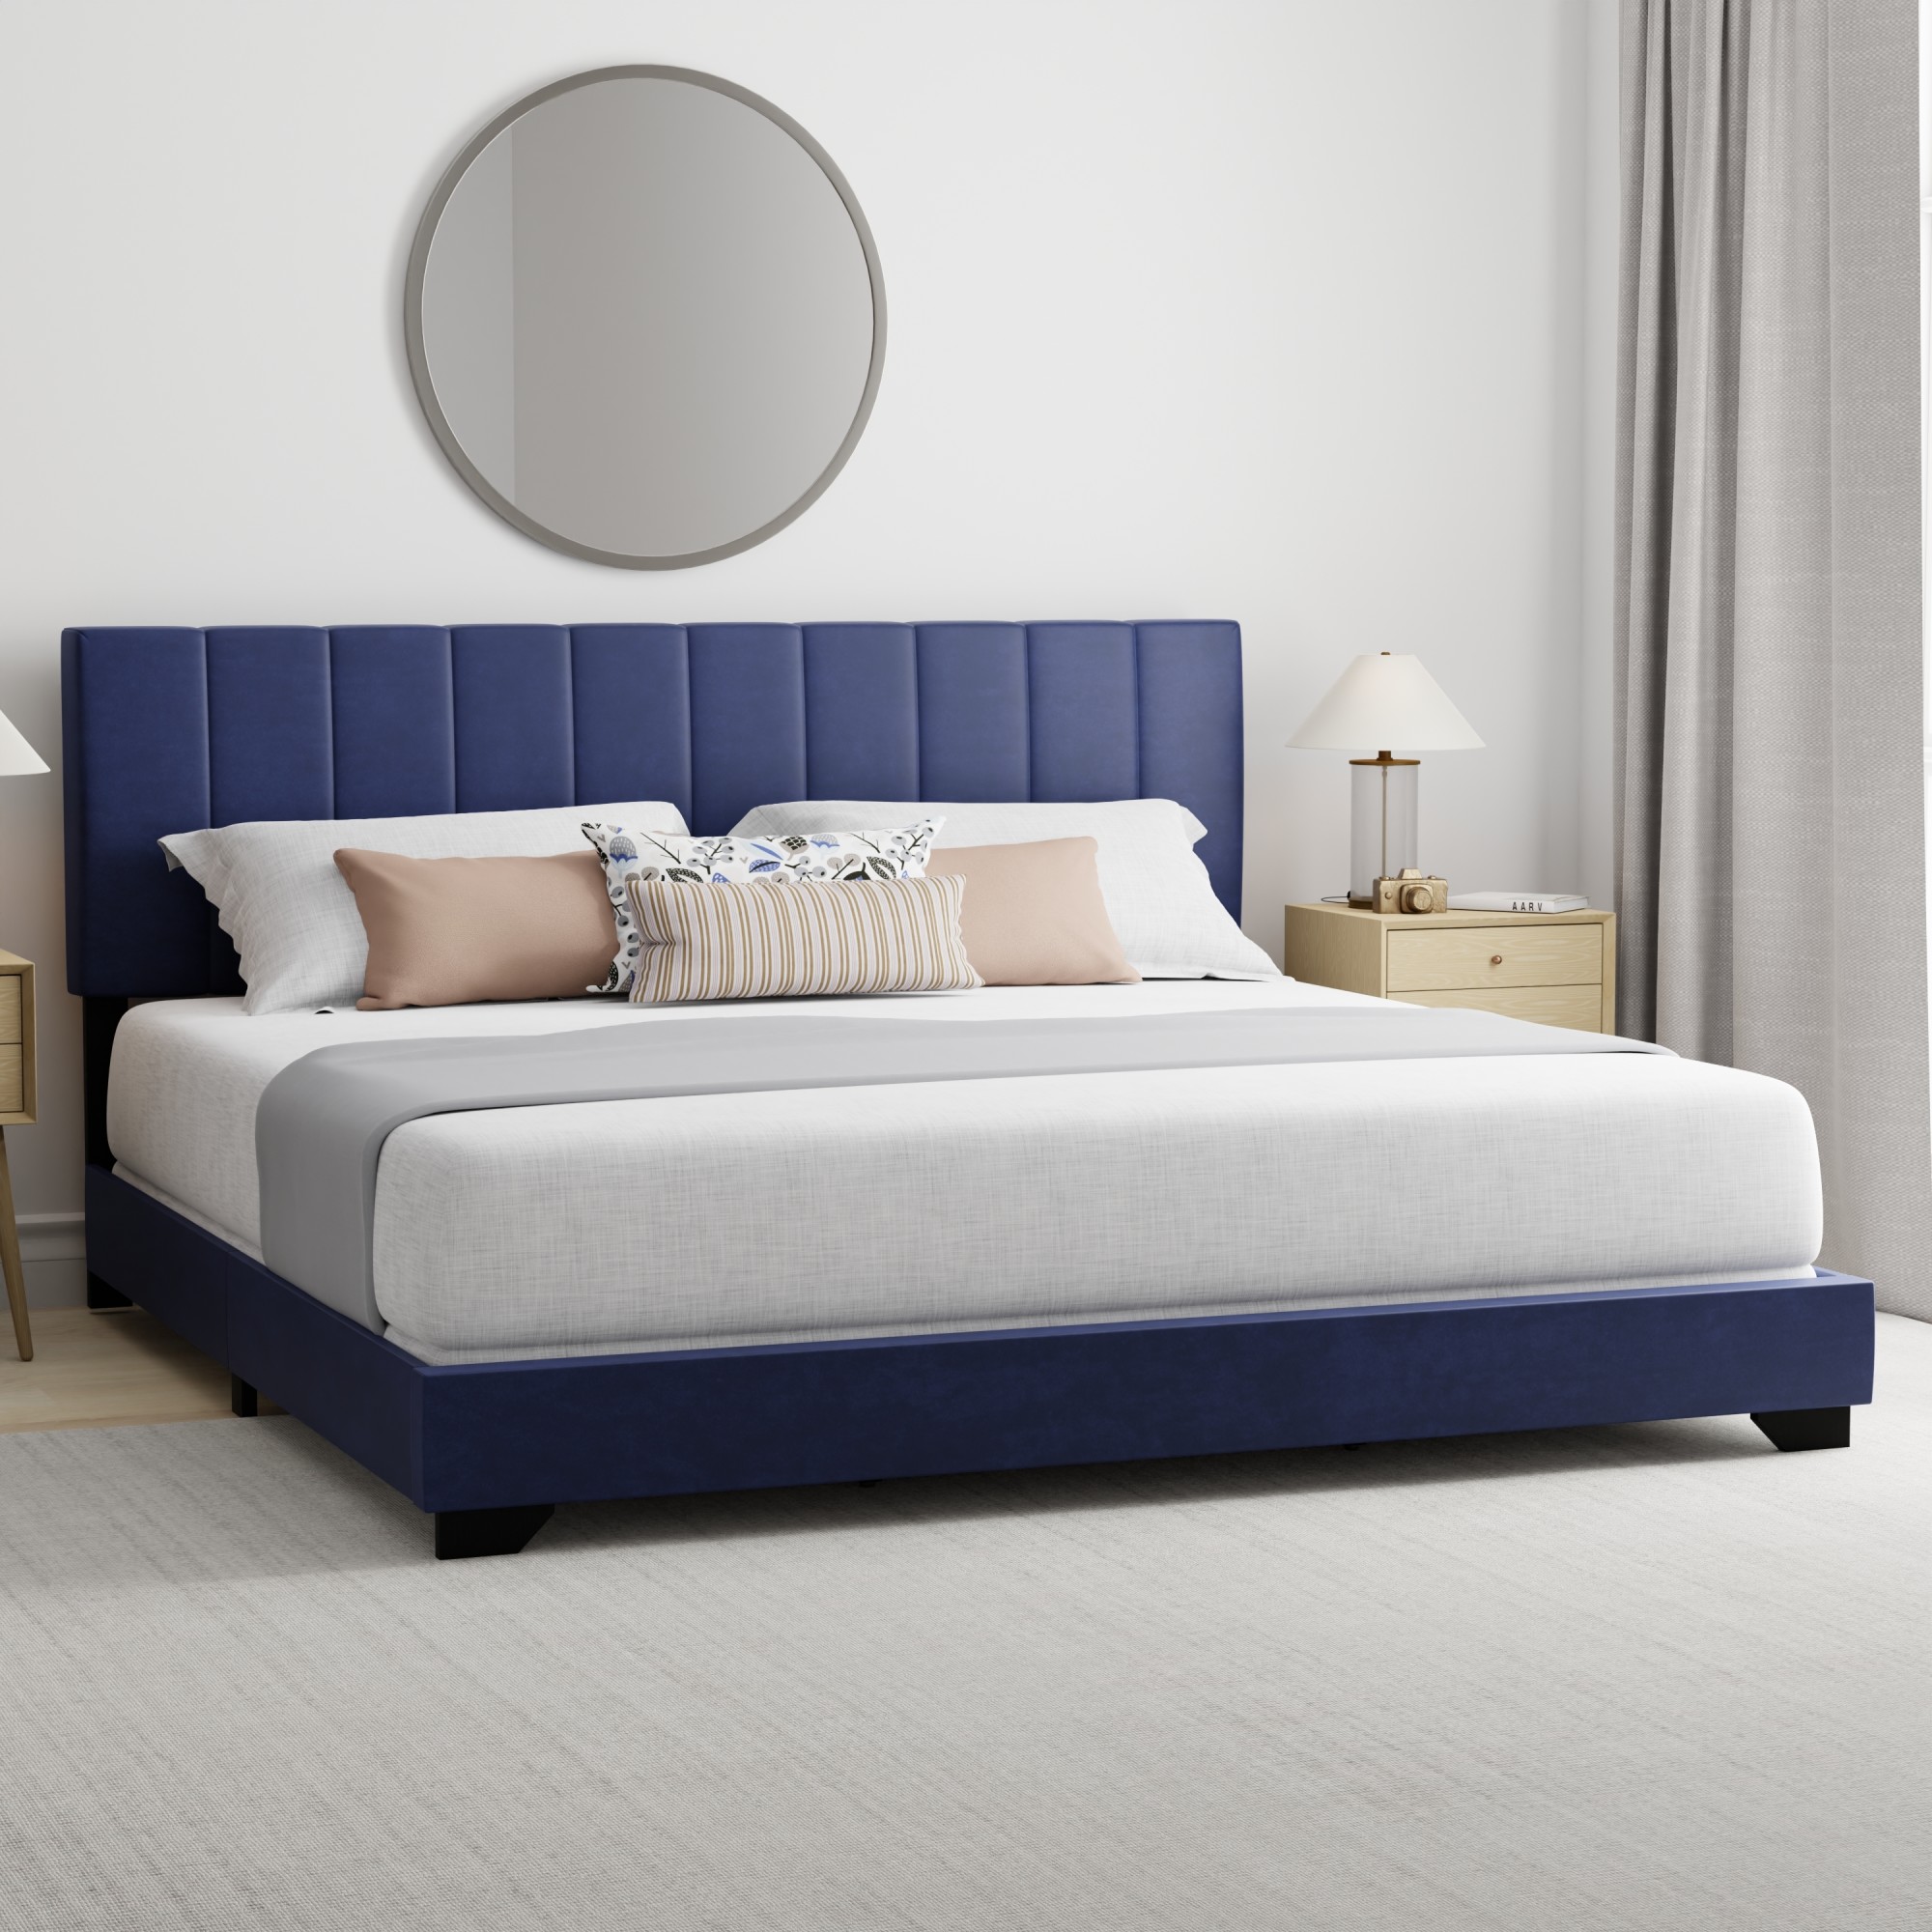 Reece Channel Stitched Upholstered King Bed, Sapphire, by Hillsdale Living Essentials - image 1 of 17